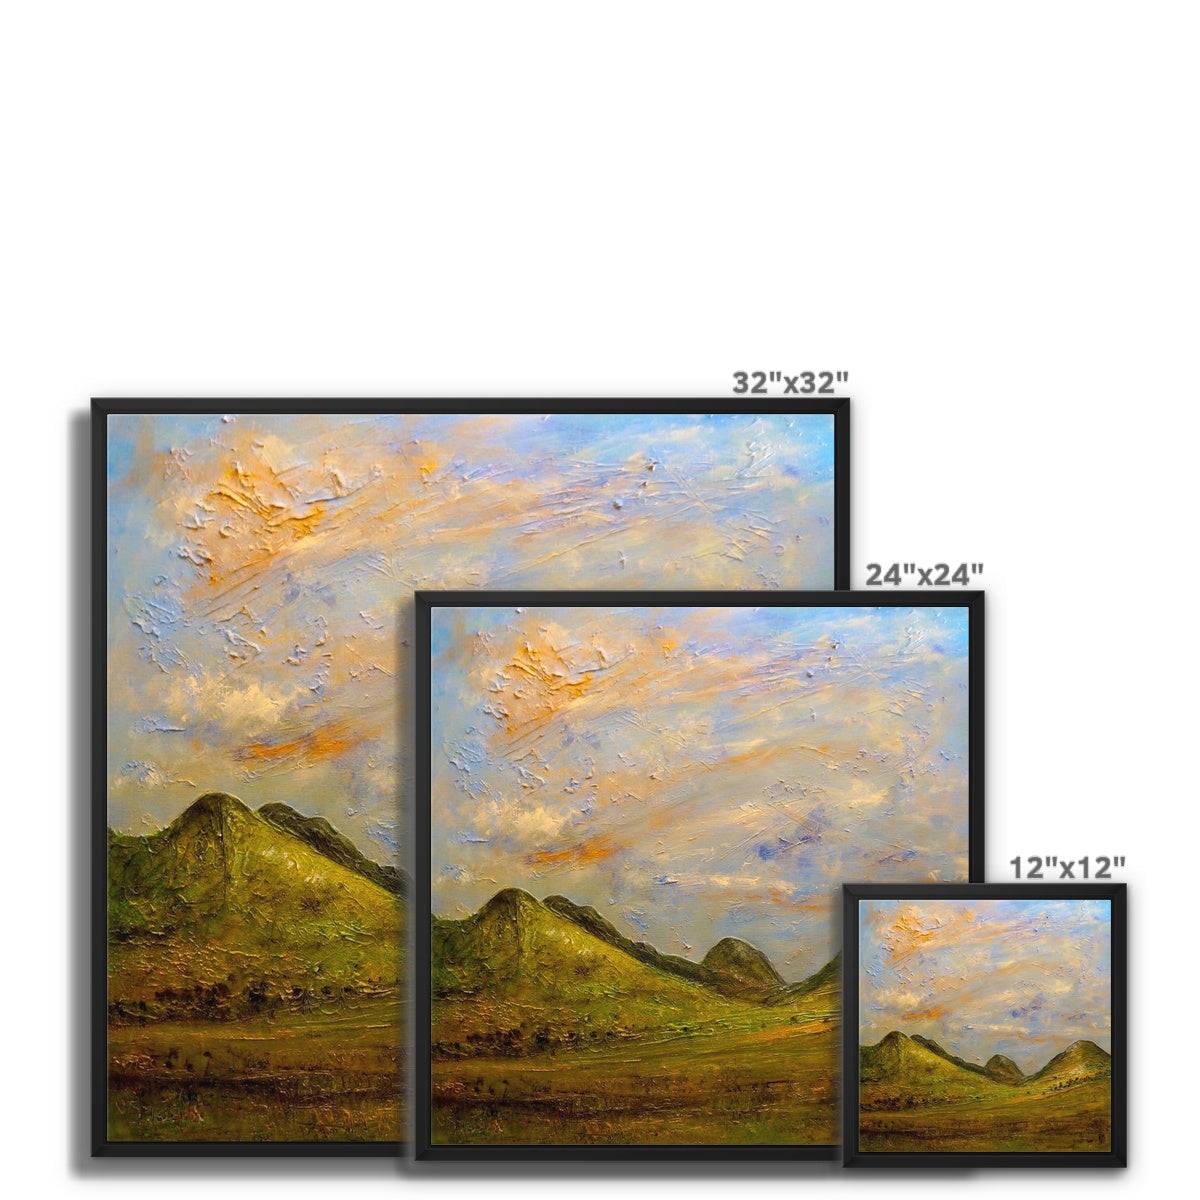 Glencoe Summer Painting | Framed Canvas From Scotland-Floating Framed Canvas Prints-Glencoe Art Gallery-Paintings, Prints, Homeware, Art Gifts From Scotland By Scottish Artist Kevin Hunter